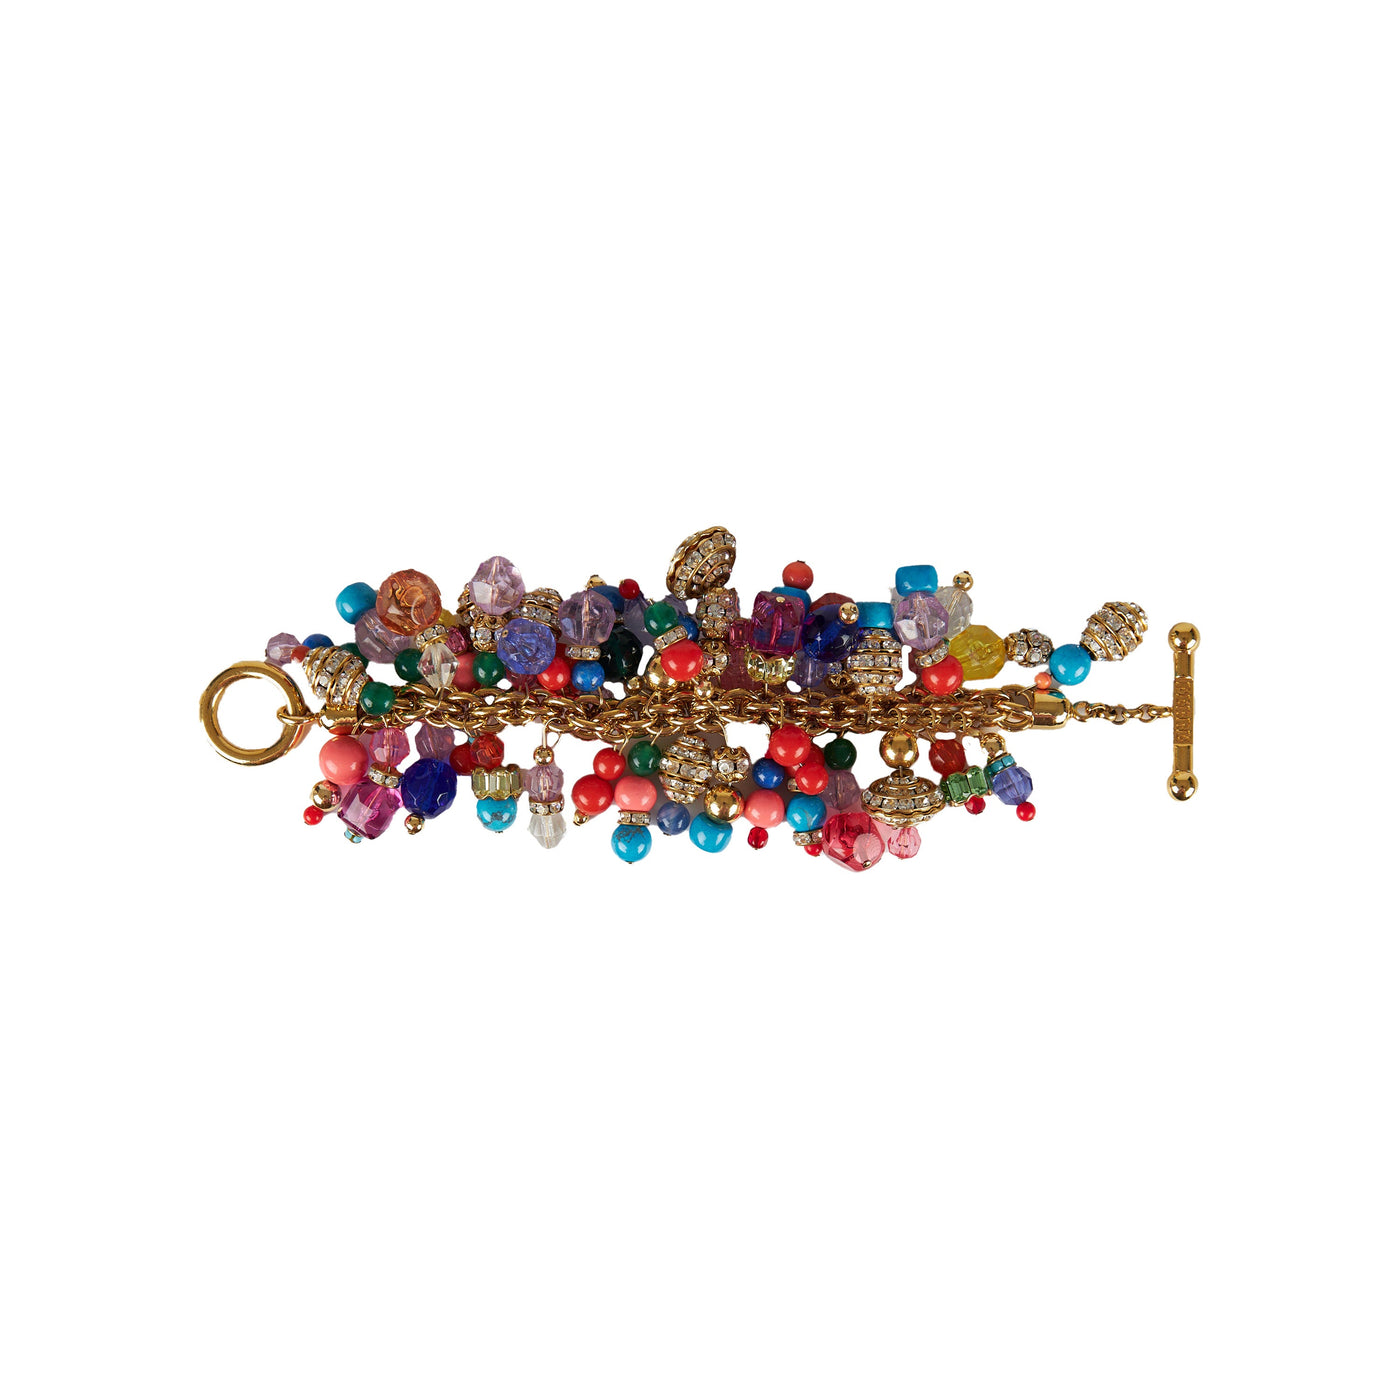 Secondhand Gianfranco Ferré Bracelet with Beads and Stones